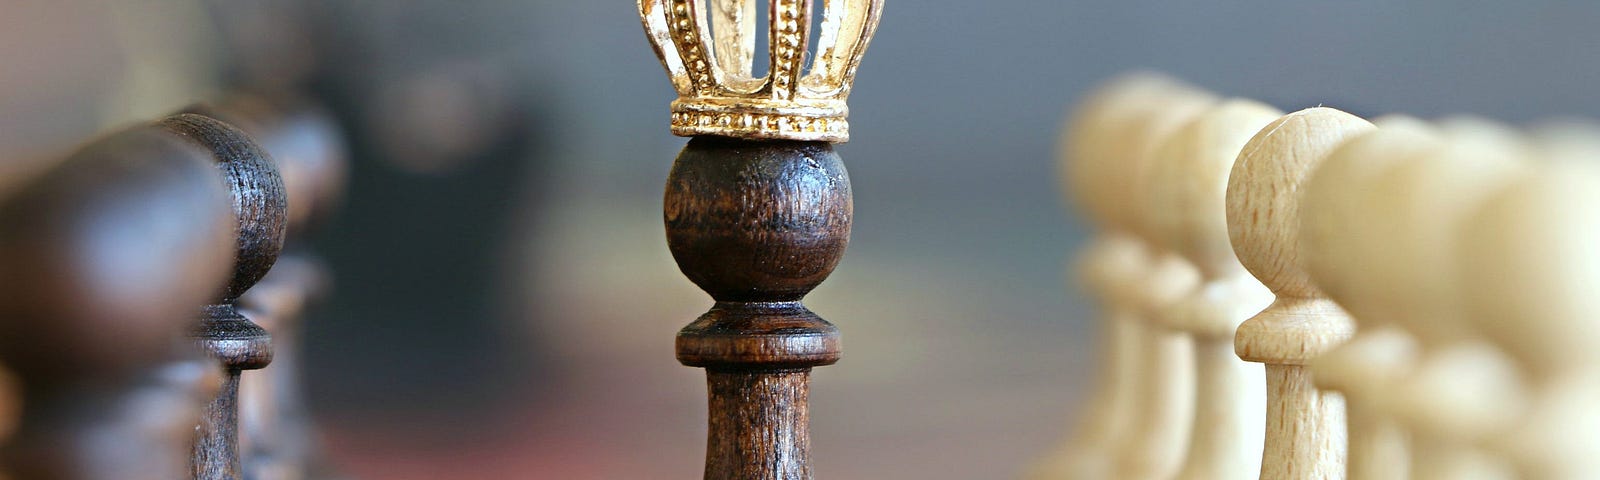 wooden chess pieces in background, queen piece with golden crown in focus